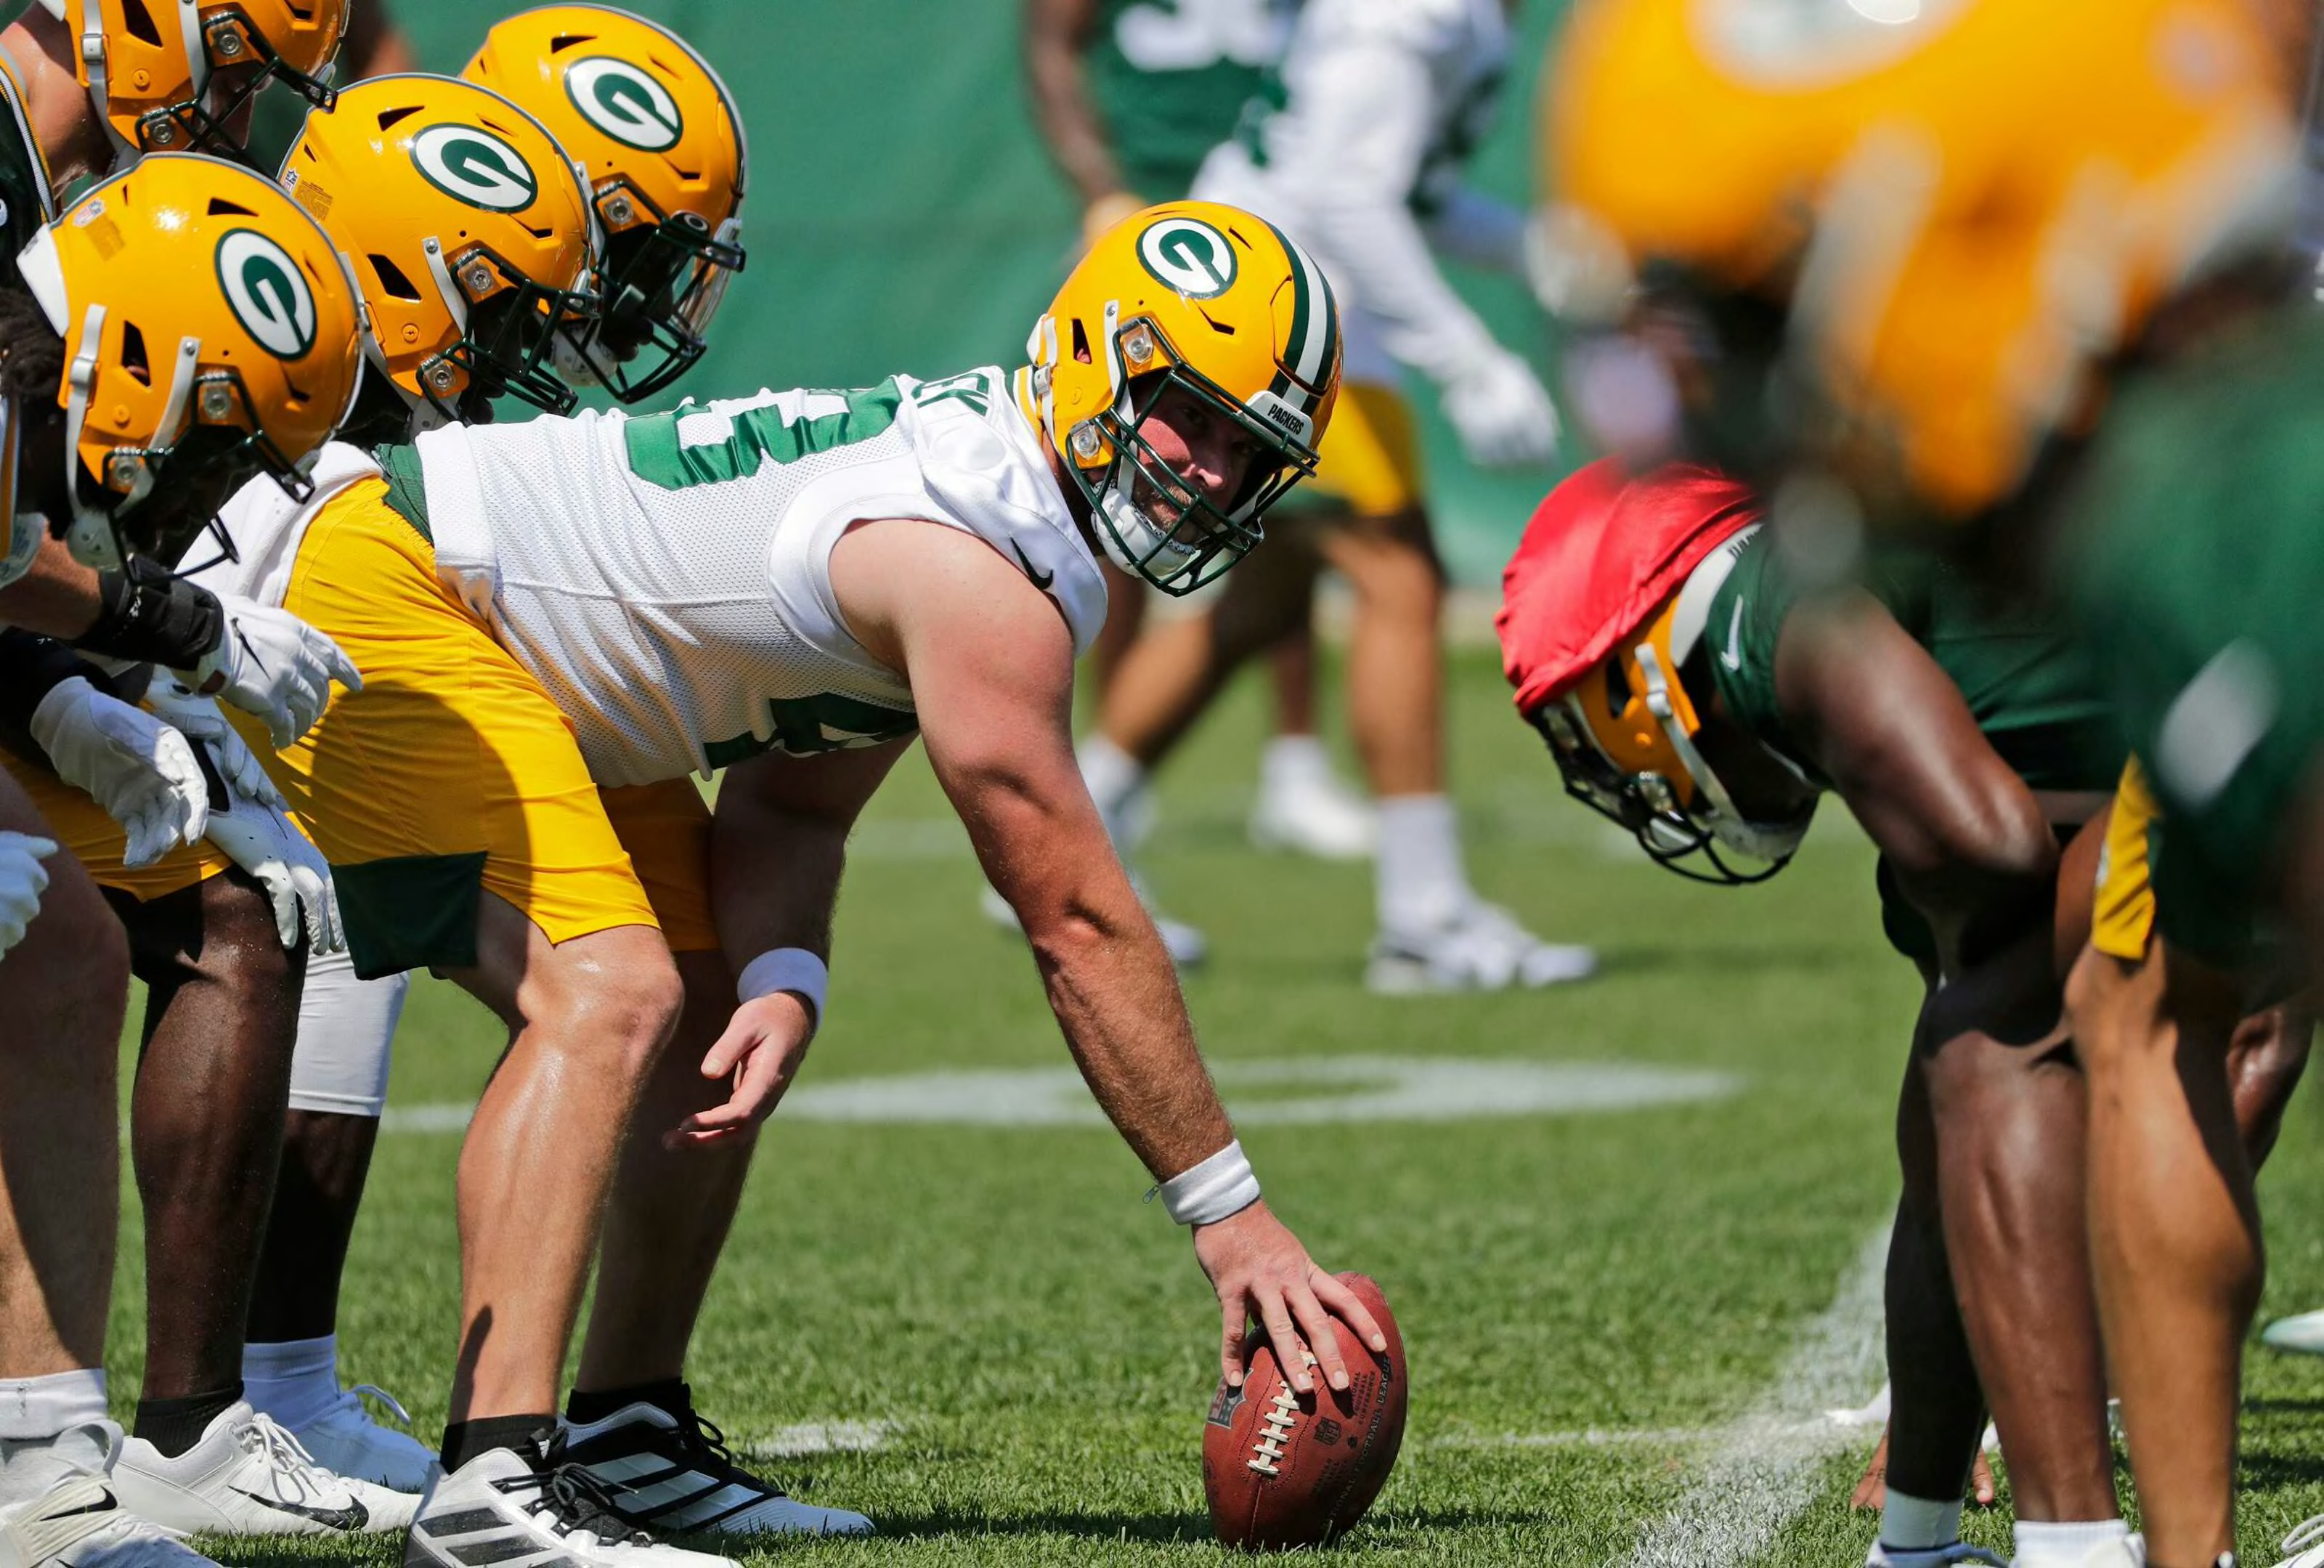 No Trade but Packers Make Slew of Roster Moves on Tuesday